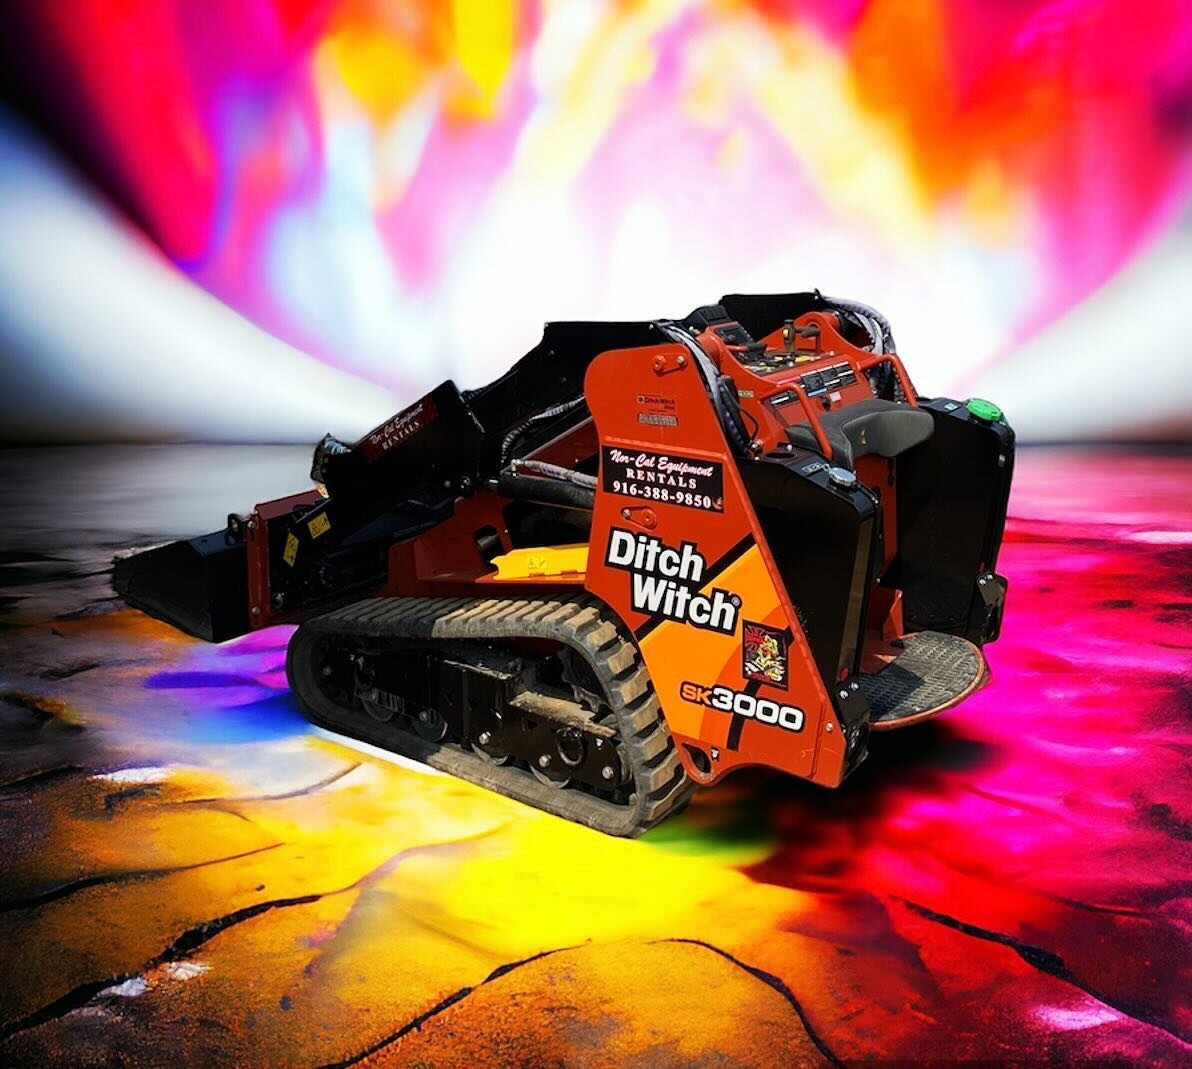 Ditch Witch SK3000 getting a little color splash for Easter #norcalequipmentrentals #norcal #easter #color #splash #photo #photographer #photography #photooftheday #photogram #photoeveryday #photographers #track #photosession #equipment #rental #rent